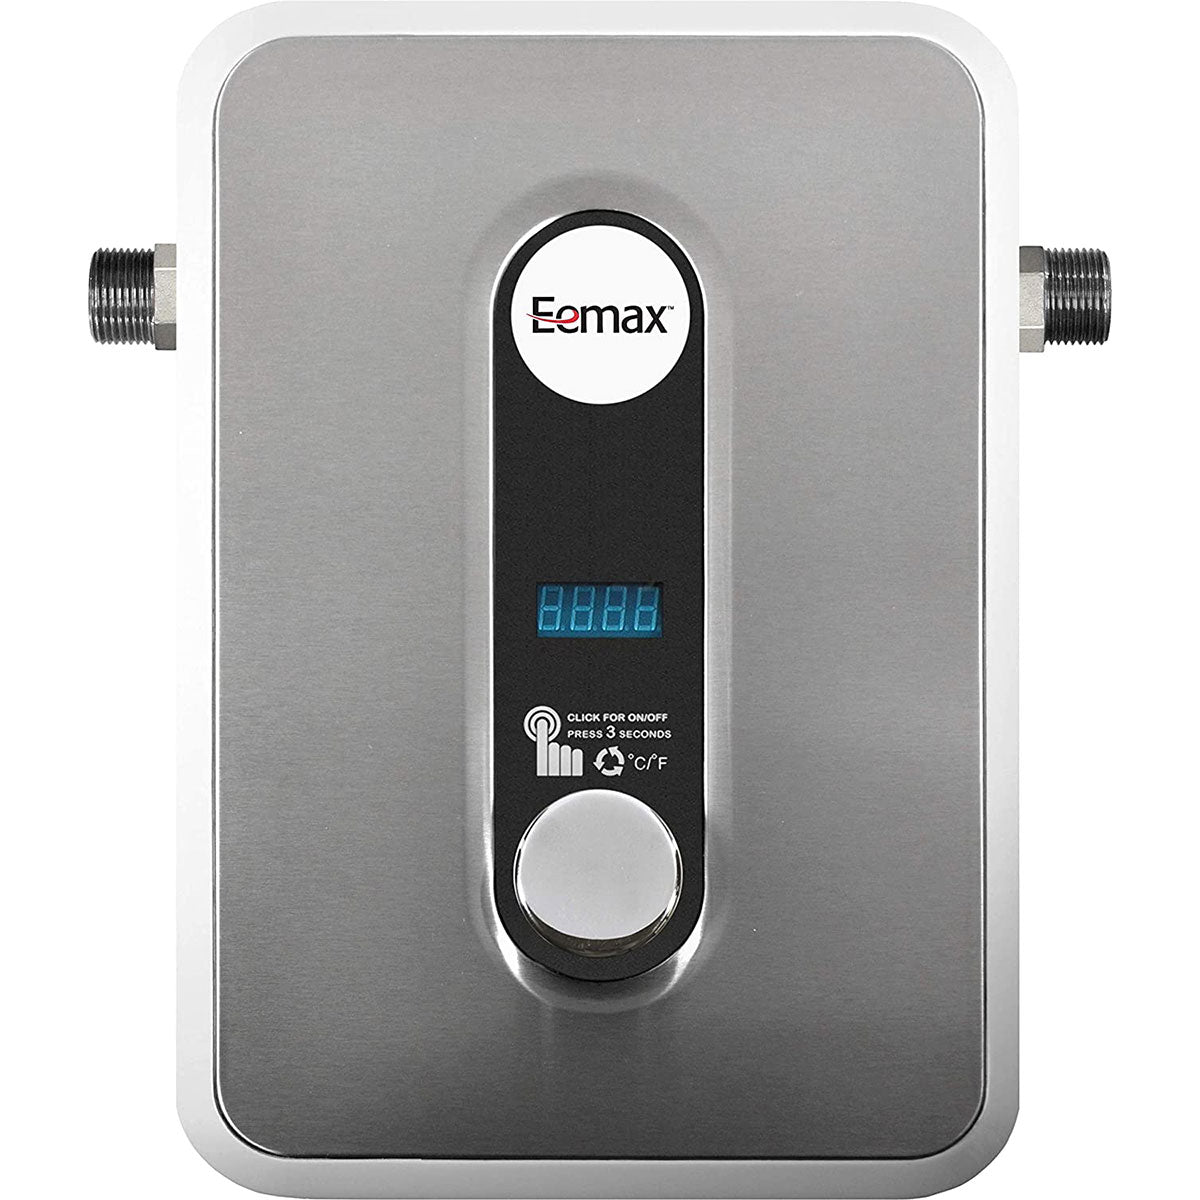 Eemax HomeAdvantage II 11kW 240V Electric Tankless Water Heater